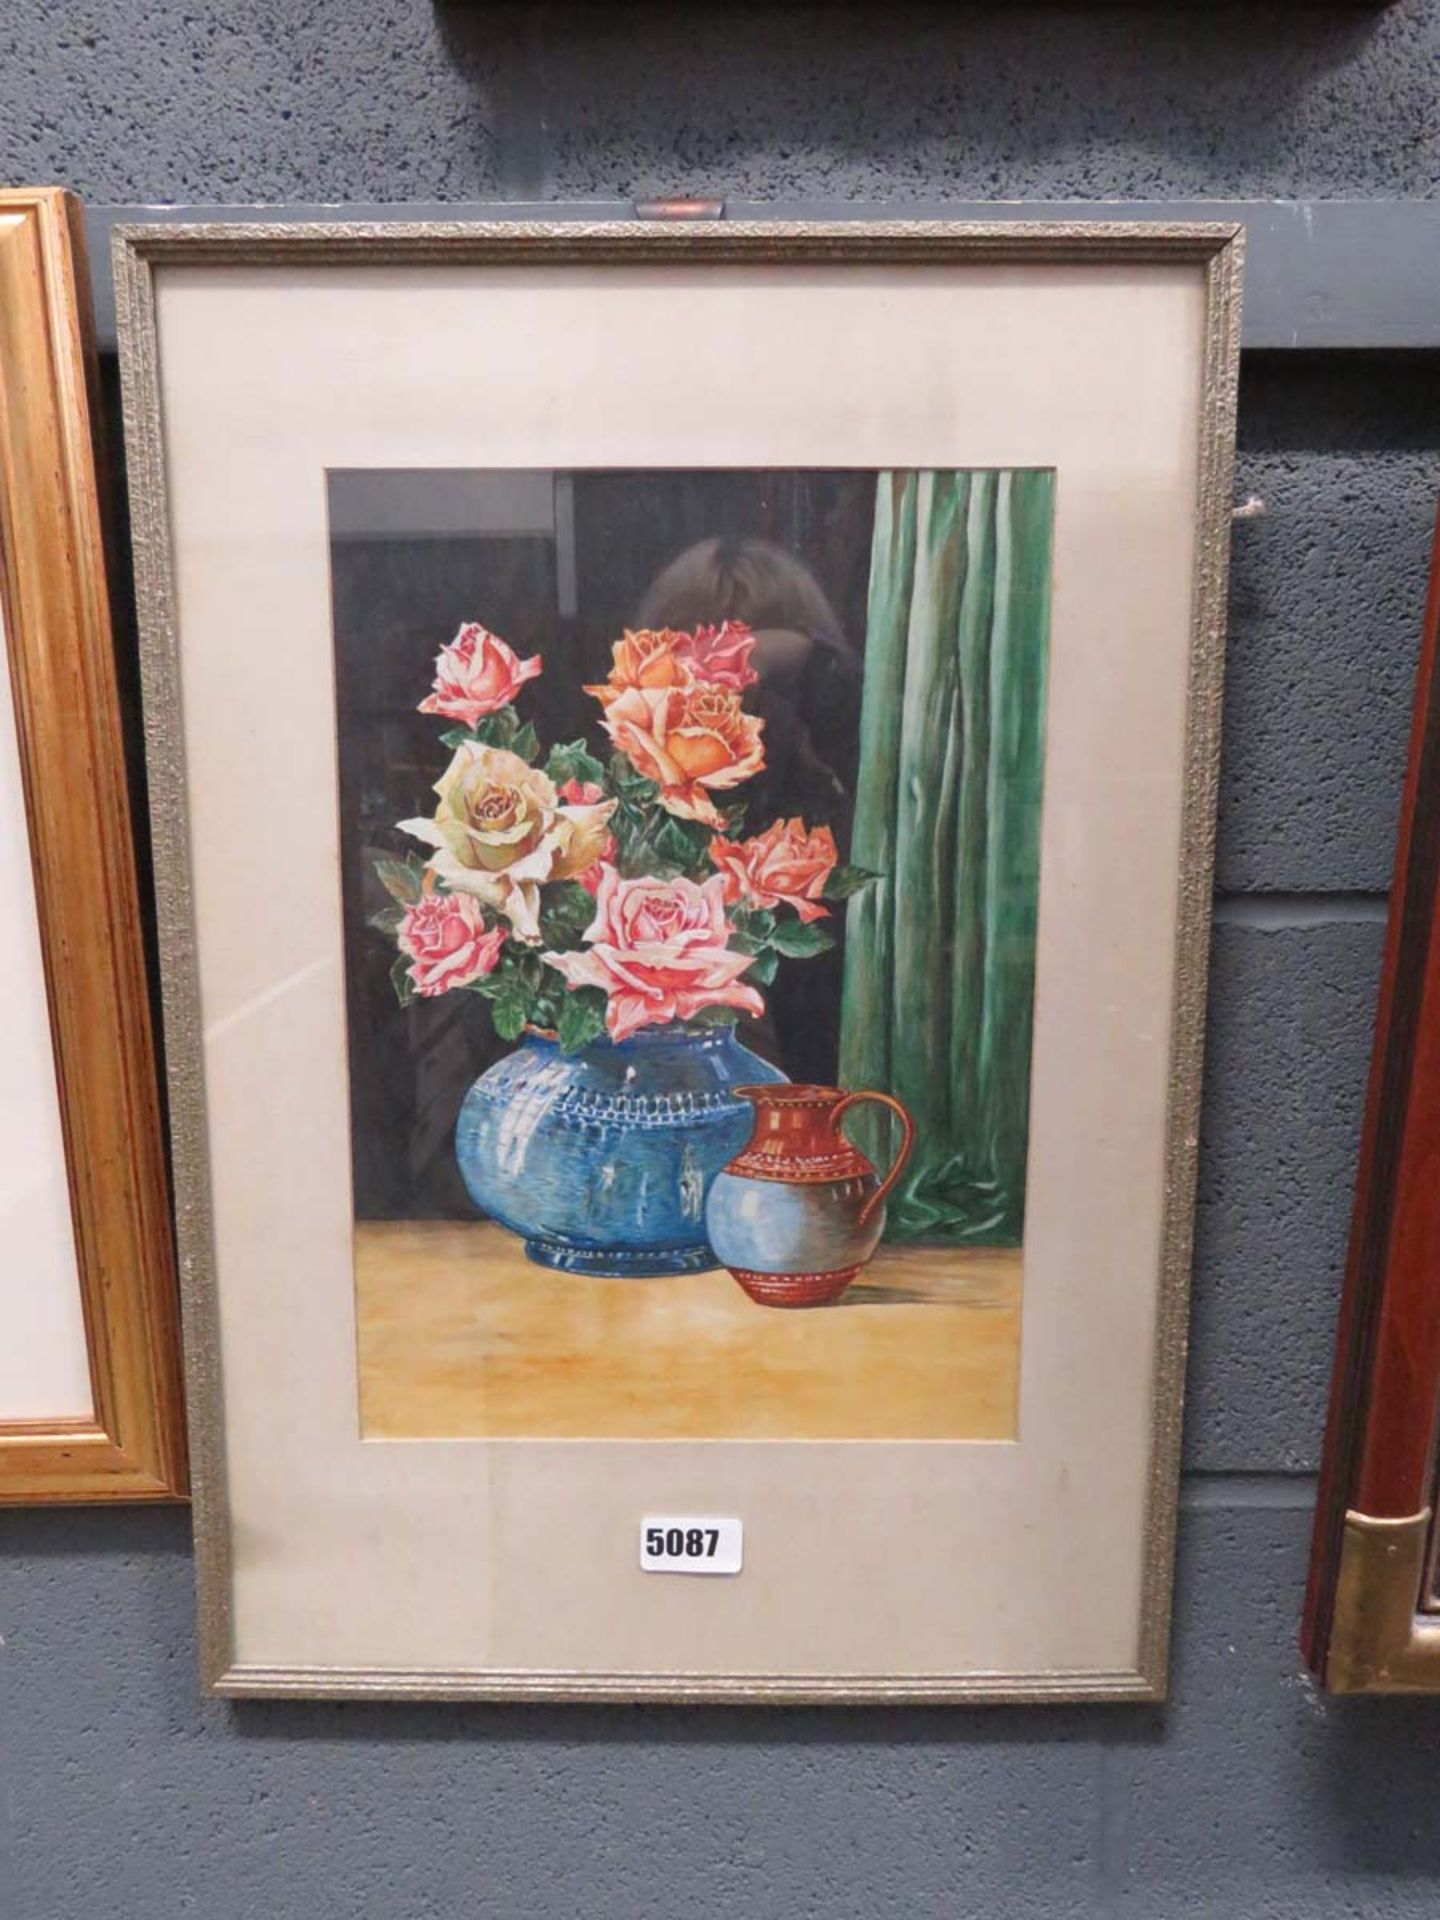 Framed and glazed picture of a still life with roses and jug